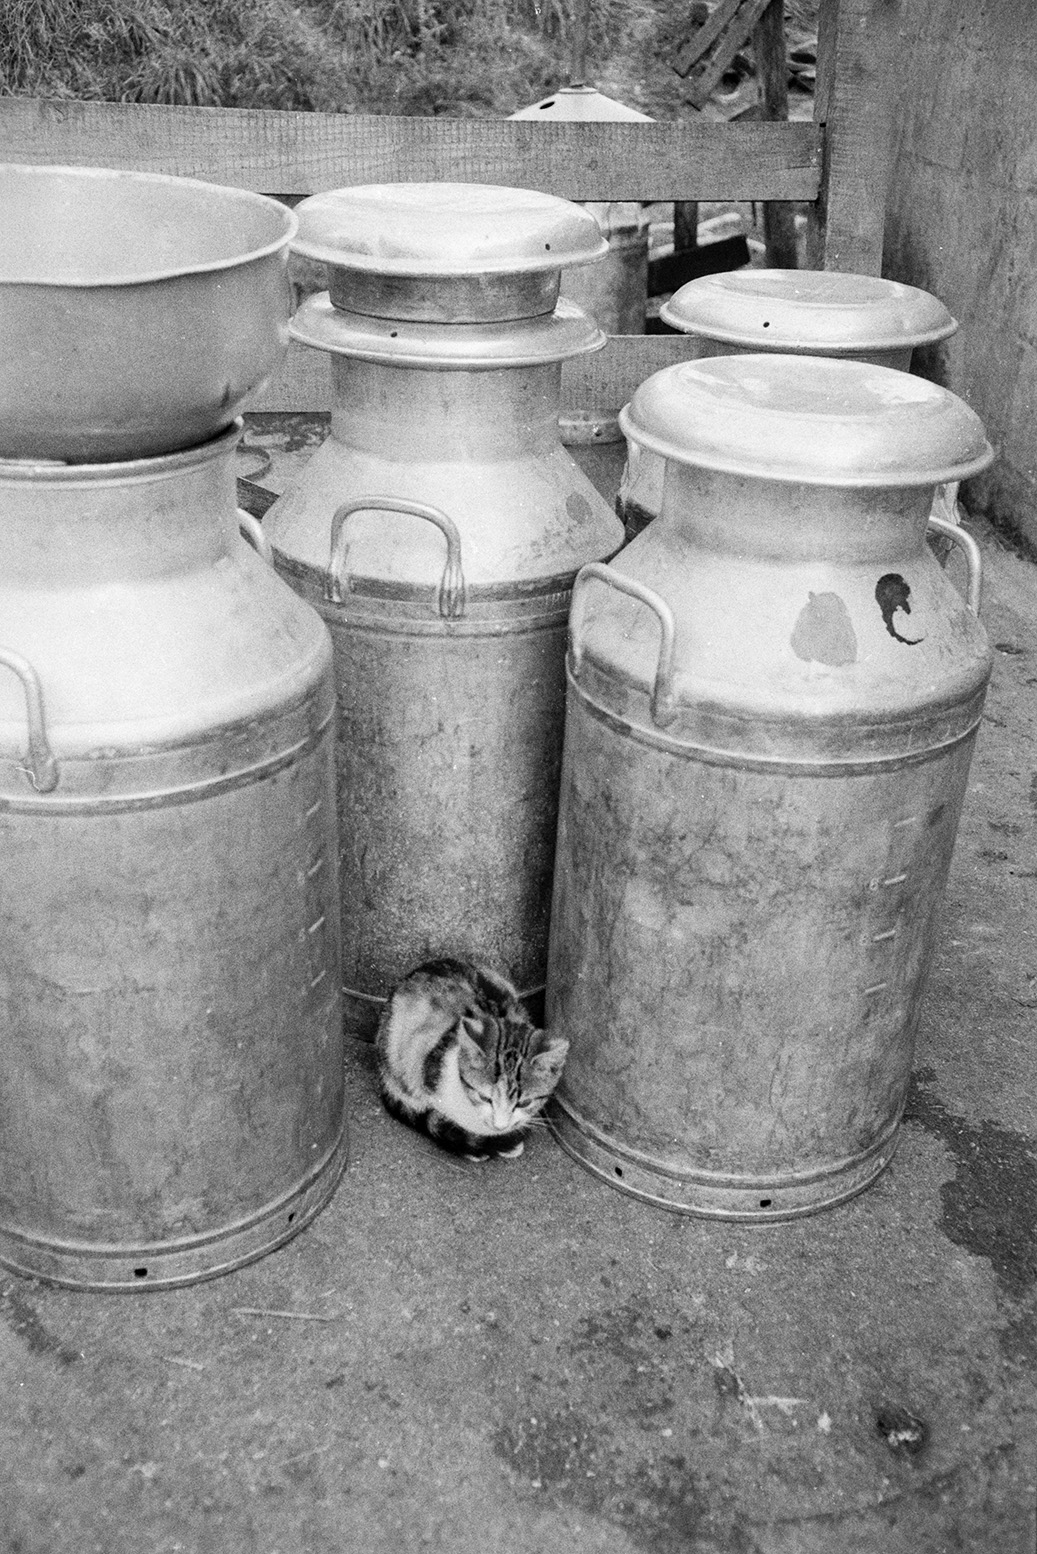 Cat sat by milk churns in a farmyard, possibly at Beaford.